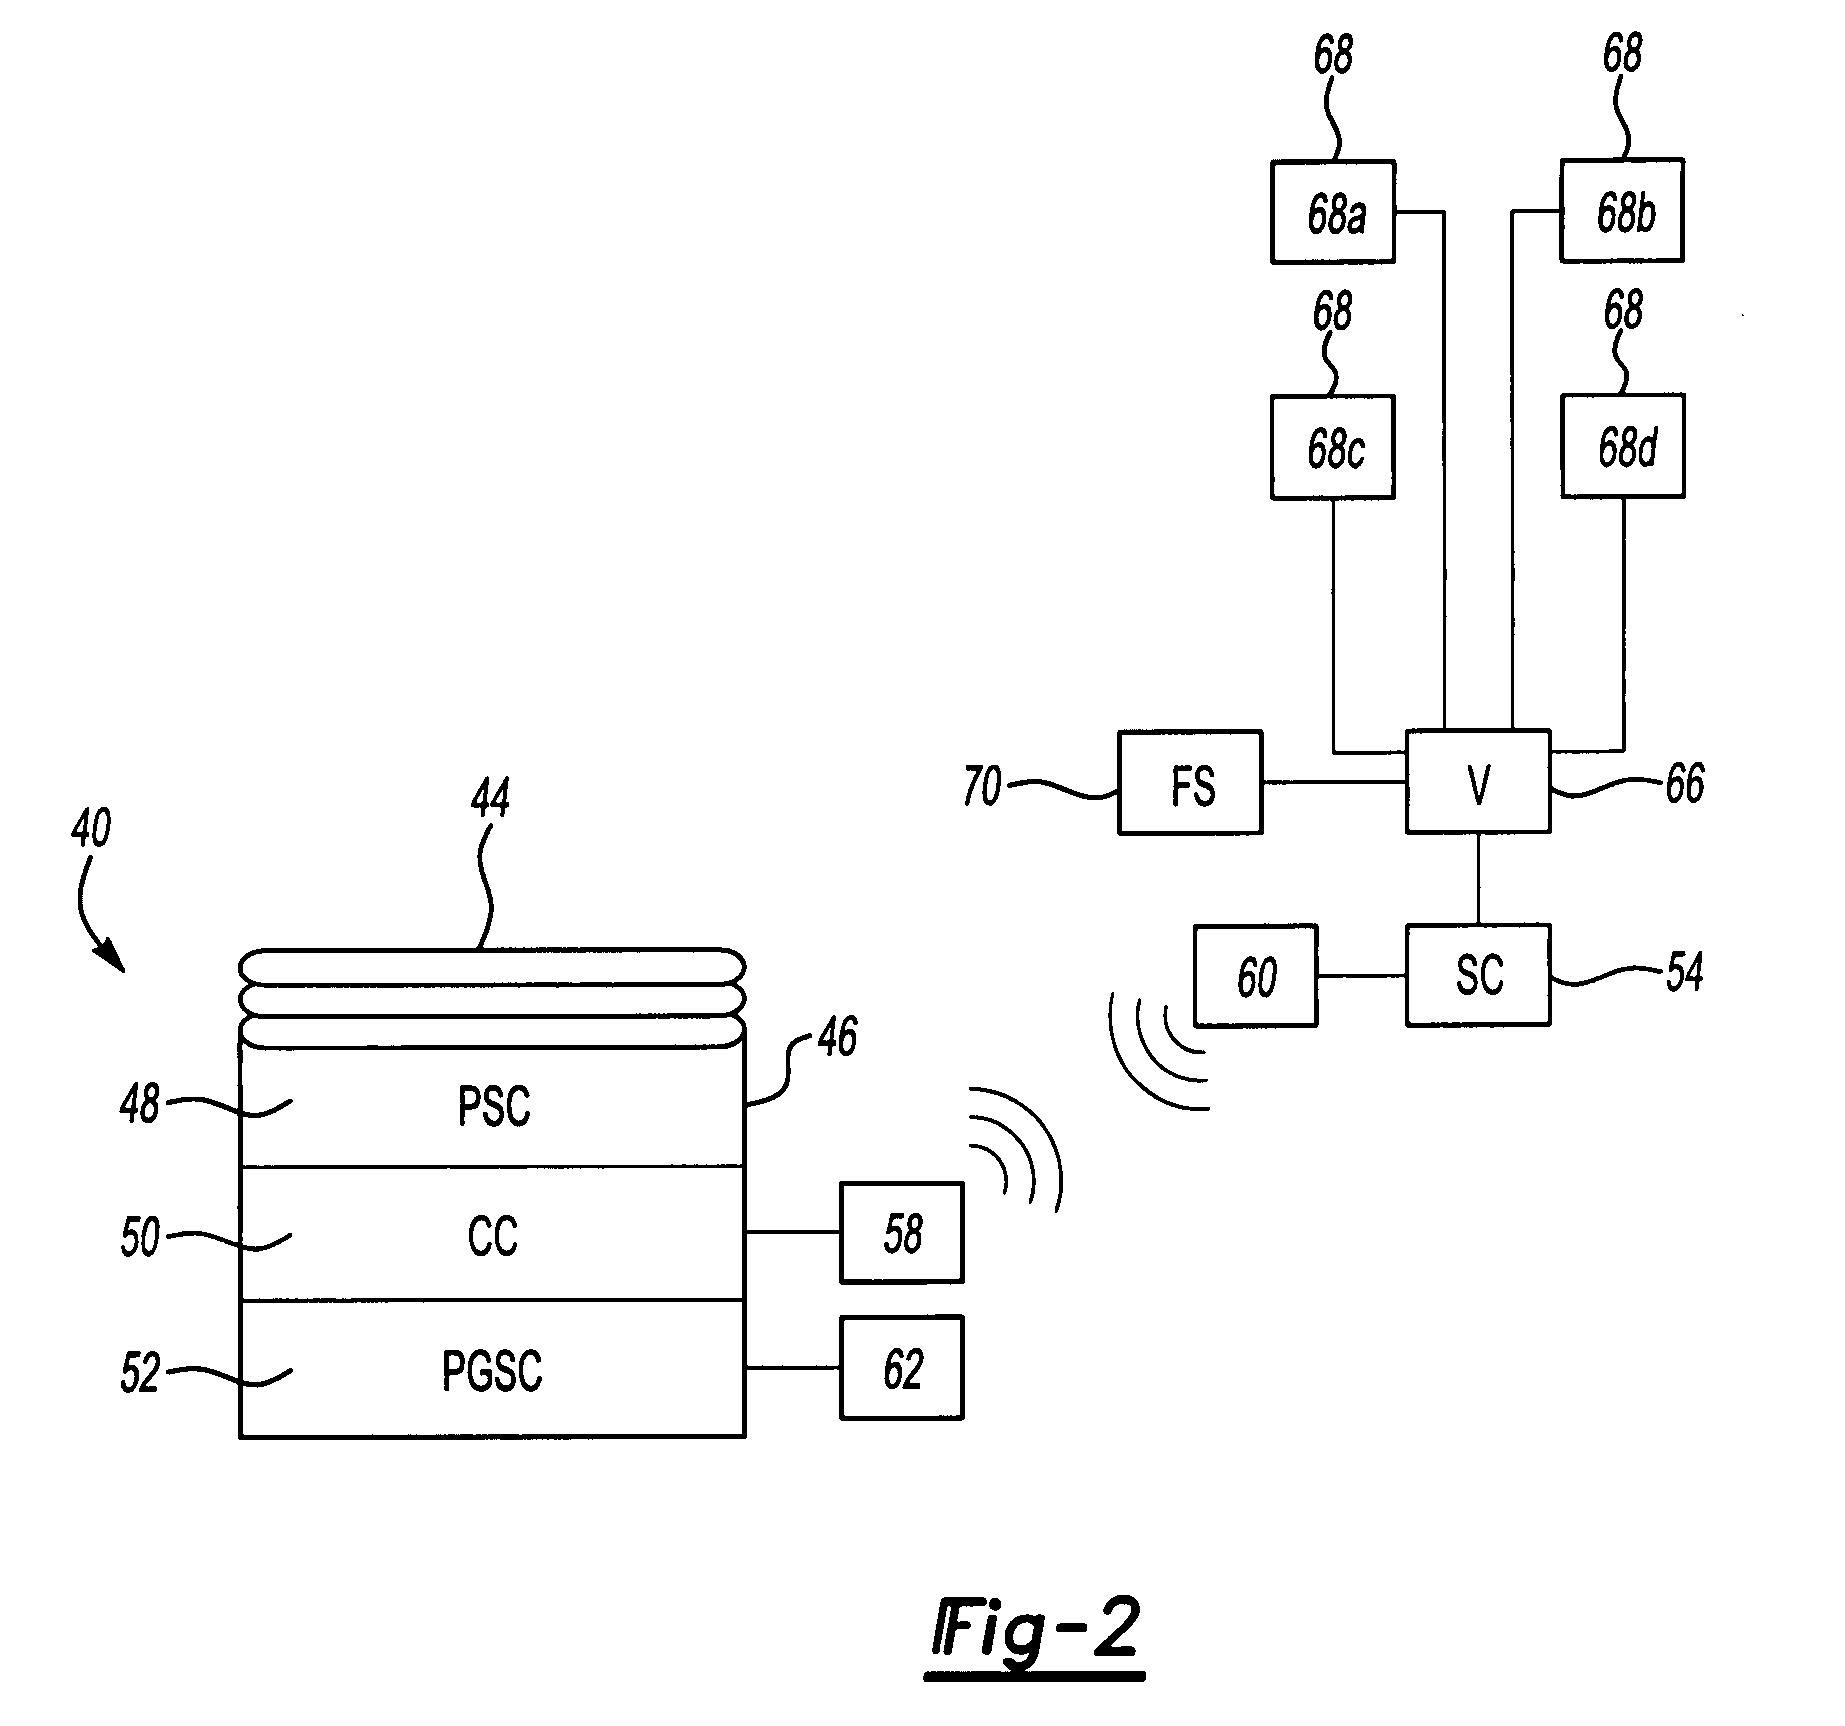 Shock absorber with integrated position sensor